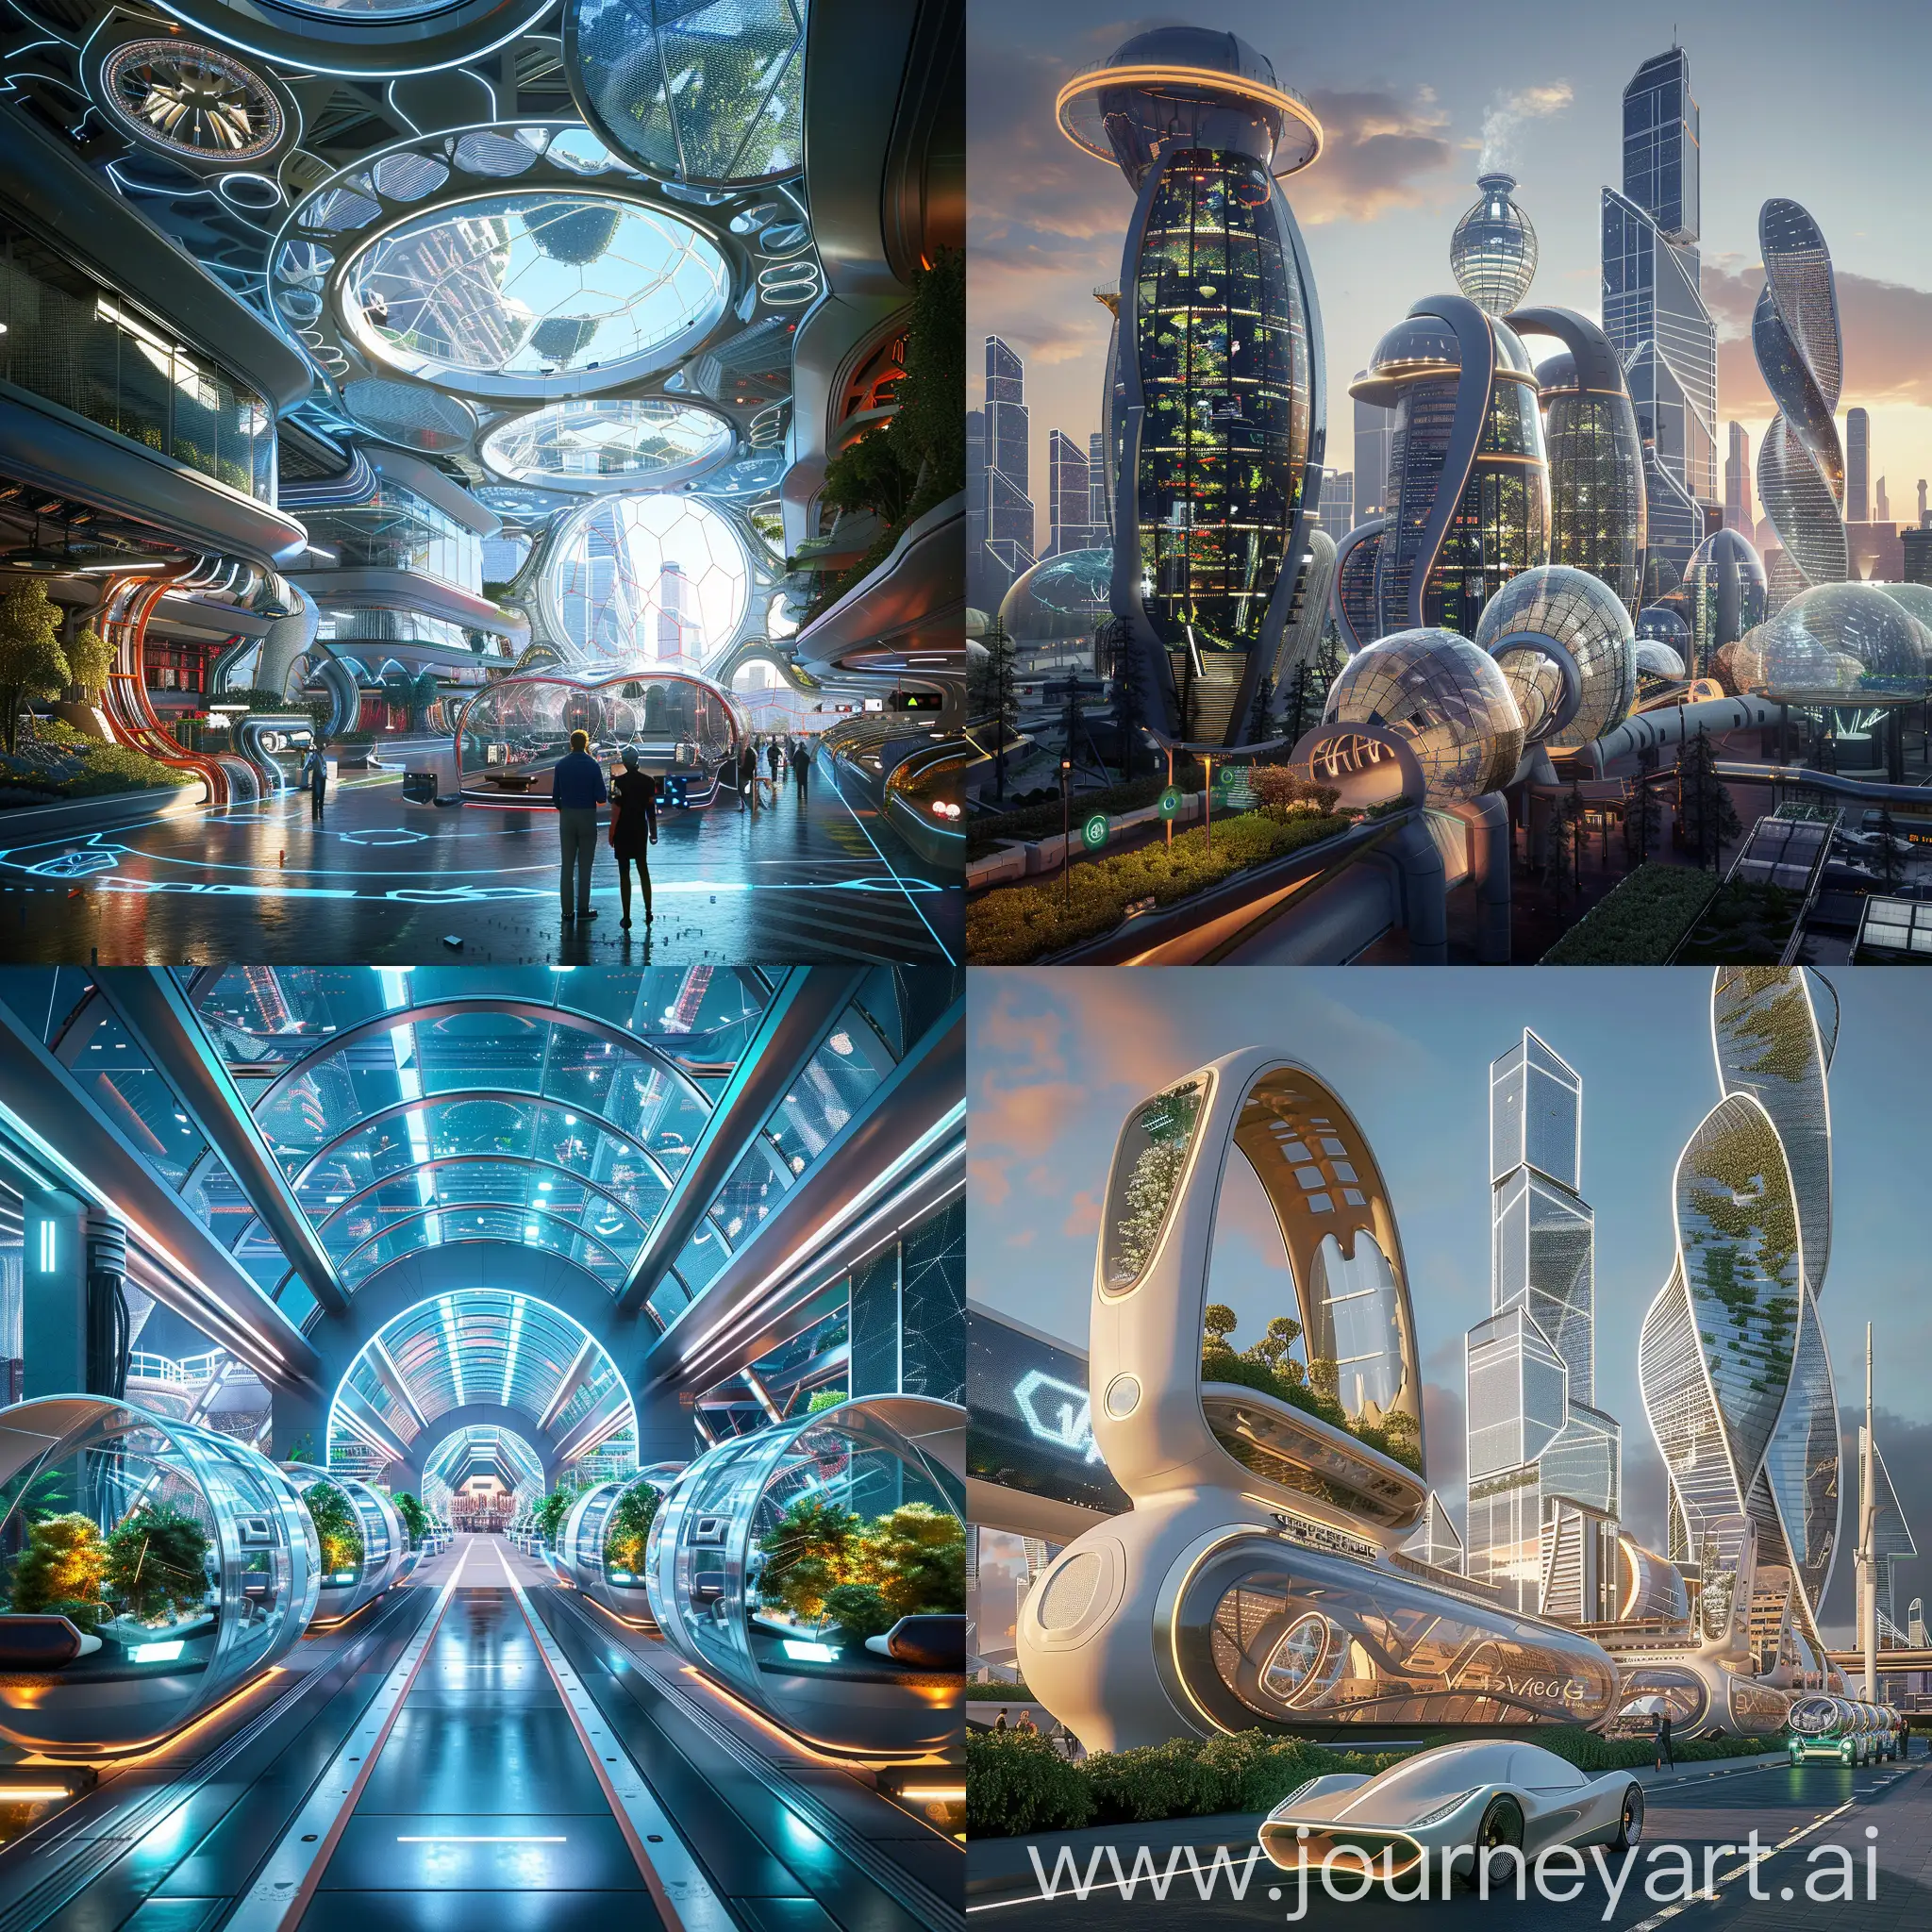 High-tech futuristic Moscow, Aerotroponic Farms by Bayer, Hyperloop Pods by Virgin Hyperloop, Kinetic Facades by Tesla, AI-powered Climate Control by Google, Biometric Security by Amazon, Interactive Holographic Displays by Microsoft, Self-cleaning Nanotech Surfaces by Samsung, Personalized Workspaces by Steelcase, Robotic Assistants by Boston Dynamics, 3D-printed Furniture by IKEA, Sky Farms by Panasonic, Self-repairing Concrete by BASF, Kinetic Wind Turbines by Siemens Gamesa, Transparent Elevator Shafts by Thyssenkrupp, Light Shows by Philips, Hyperloop Stations by Zaha Hadid Architects, Modular Construction by Skanska, Weather-adapting Roofs by ALPOLIC, Urban Skytran by Thyssenkrupp, Air Purification Systems by LG, unreal engine 5 --stylize 1000